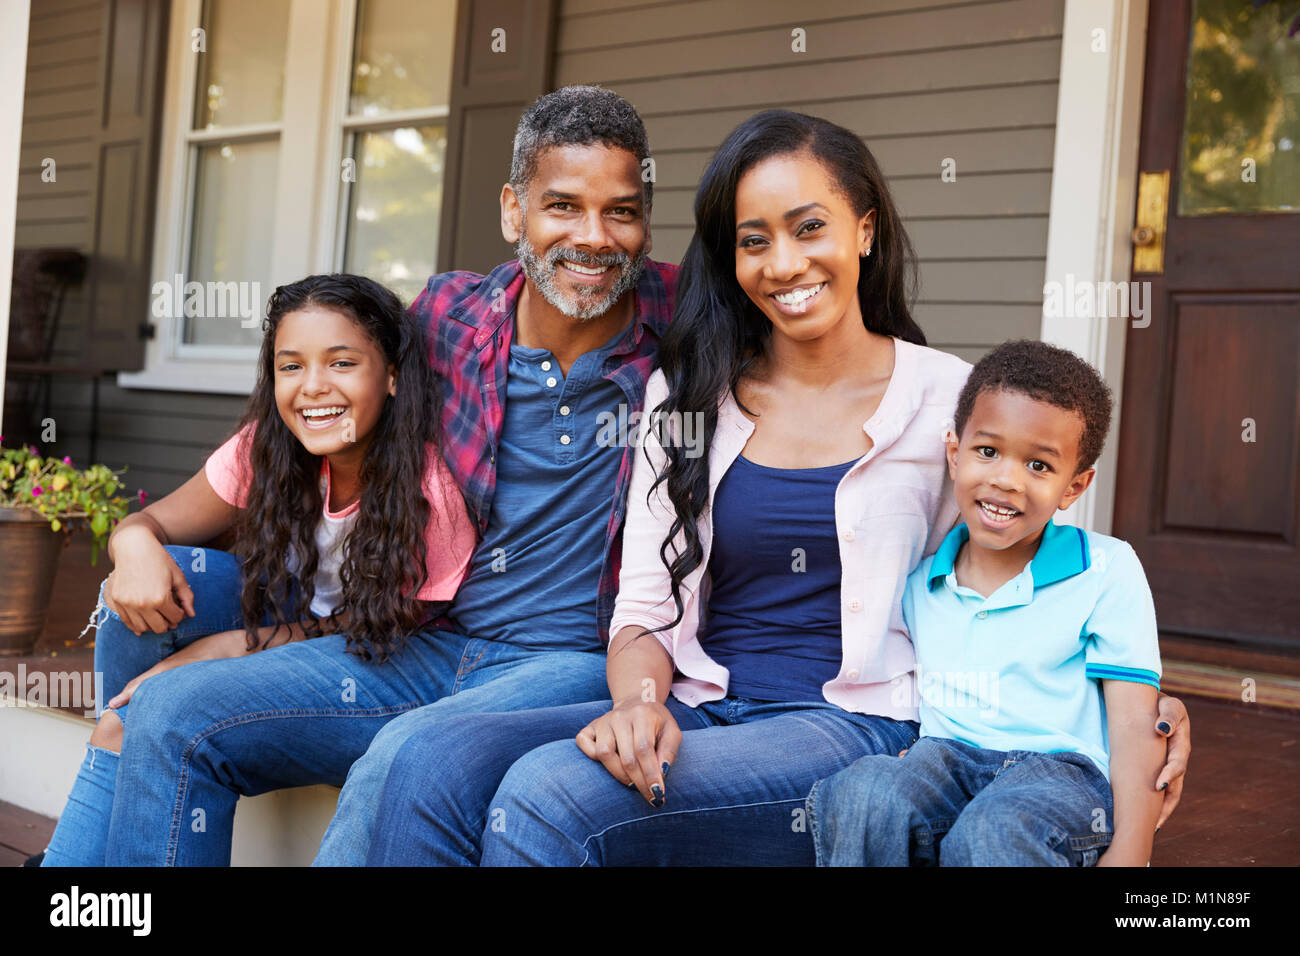 Family With Children Sit On Steps Leading Up To Porch Of Home Stock Photo